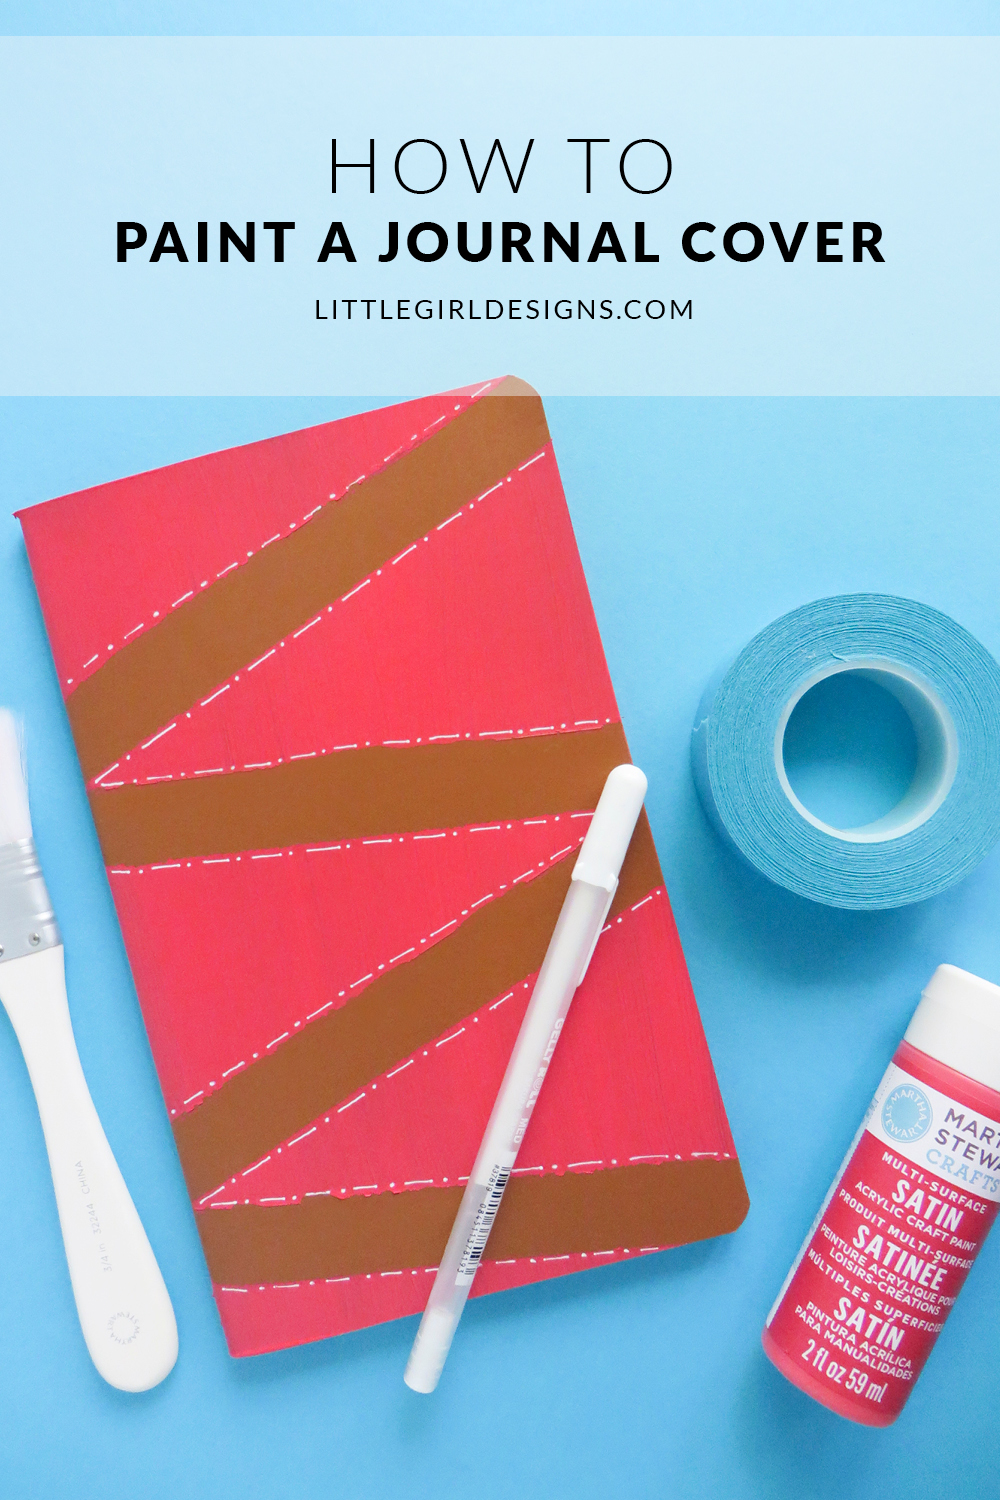 How to Paint a Journal Cover